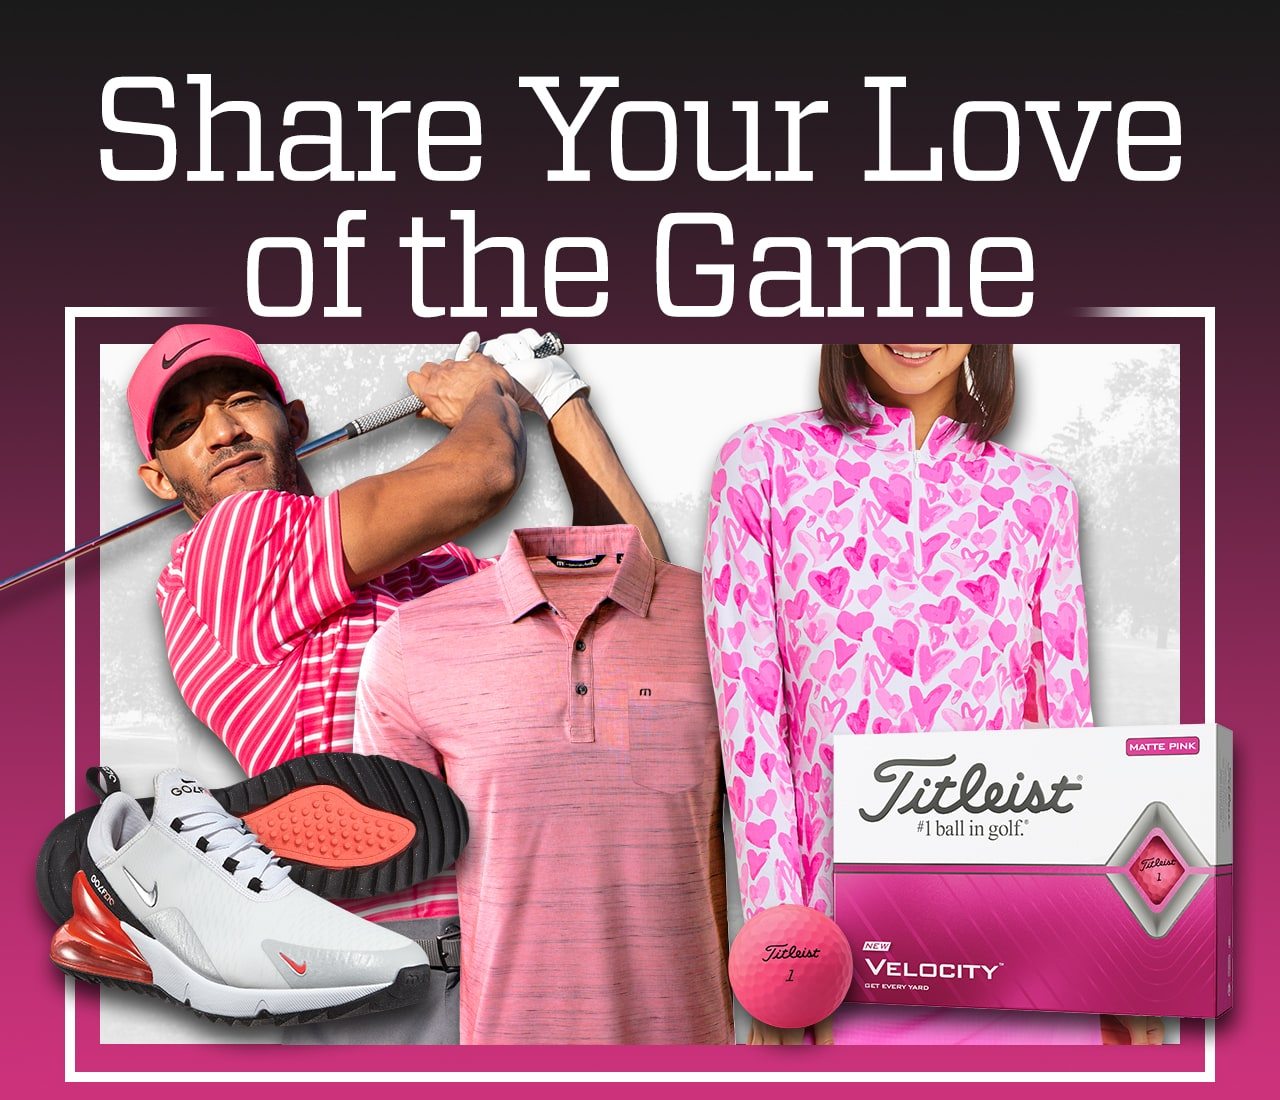 Share your love of the game.